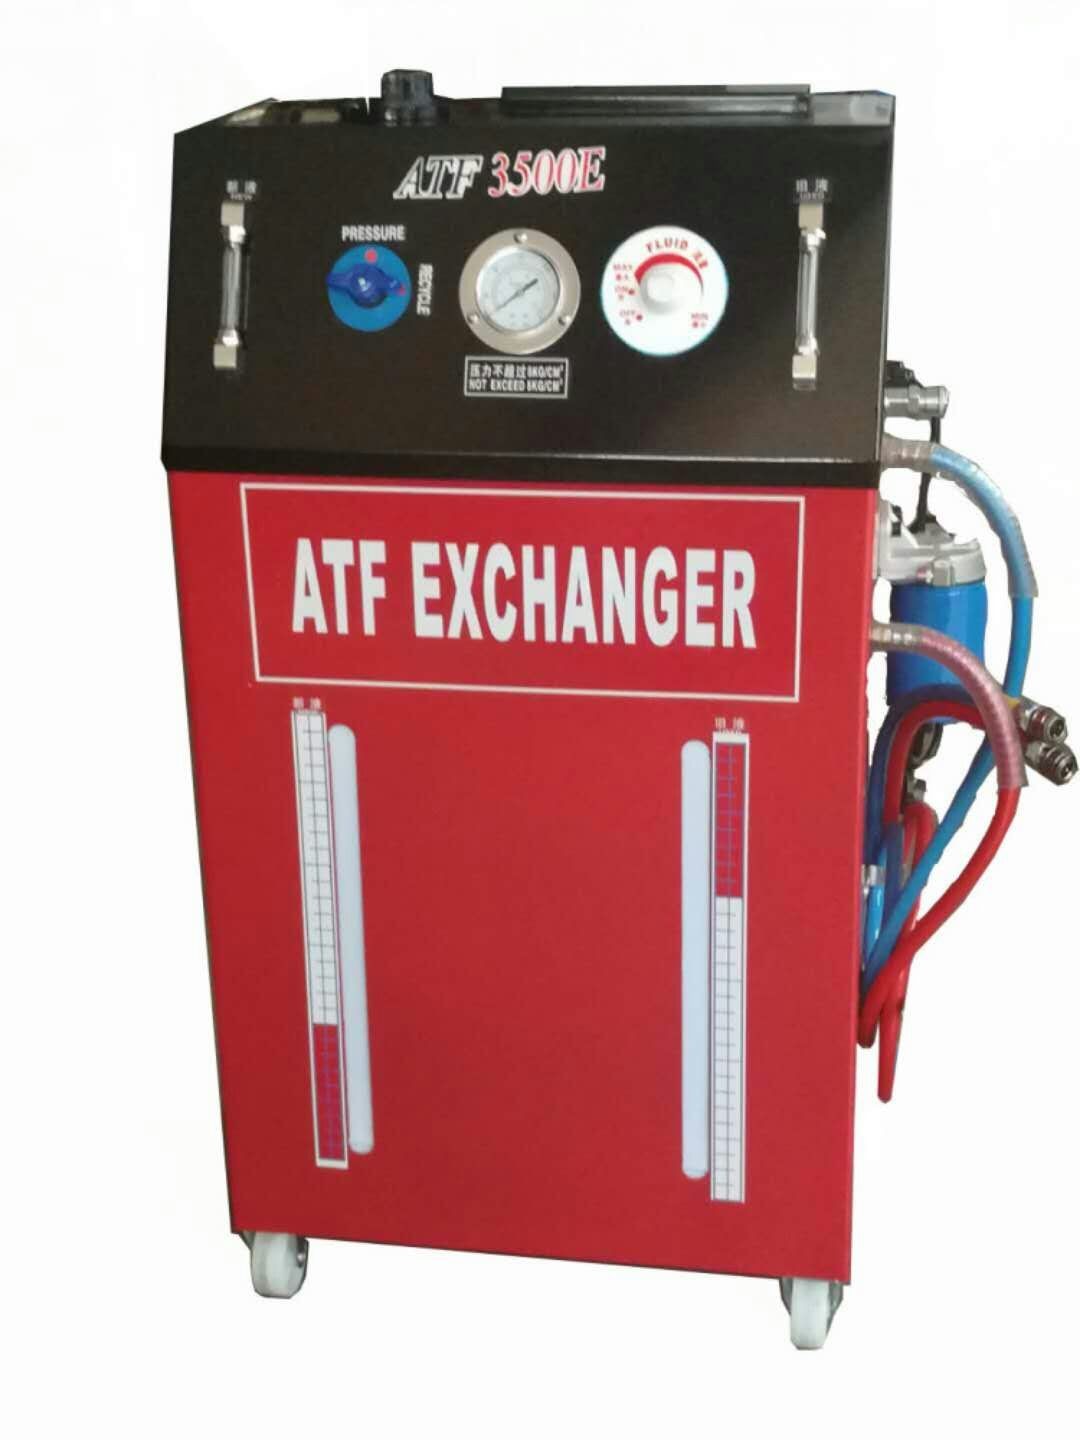 Atf-3000 Auto-Transmission Fluid Oil Exchanger